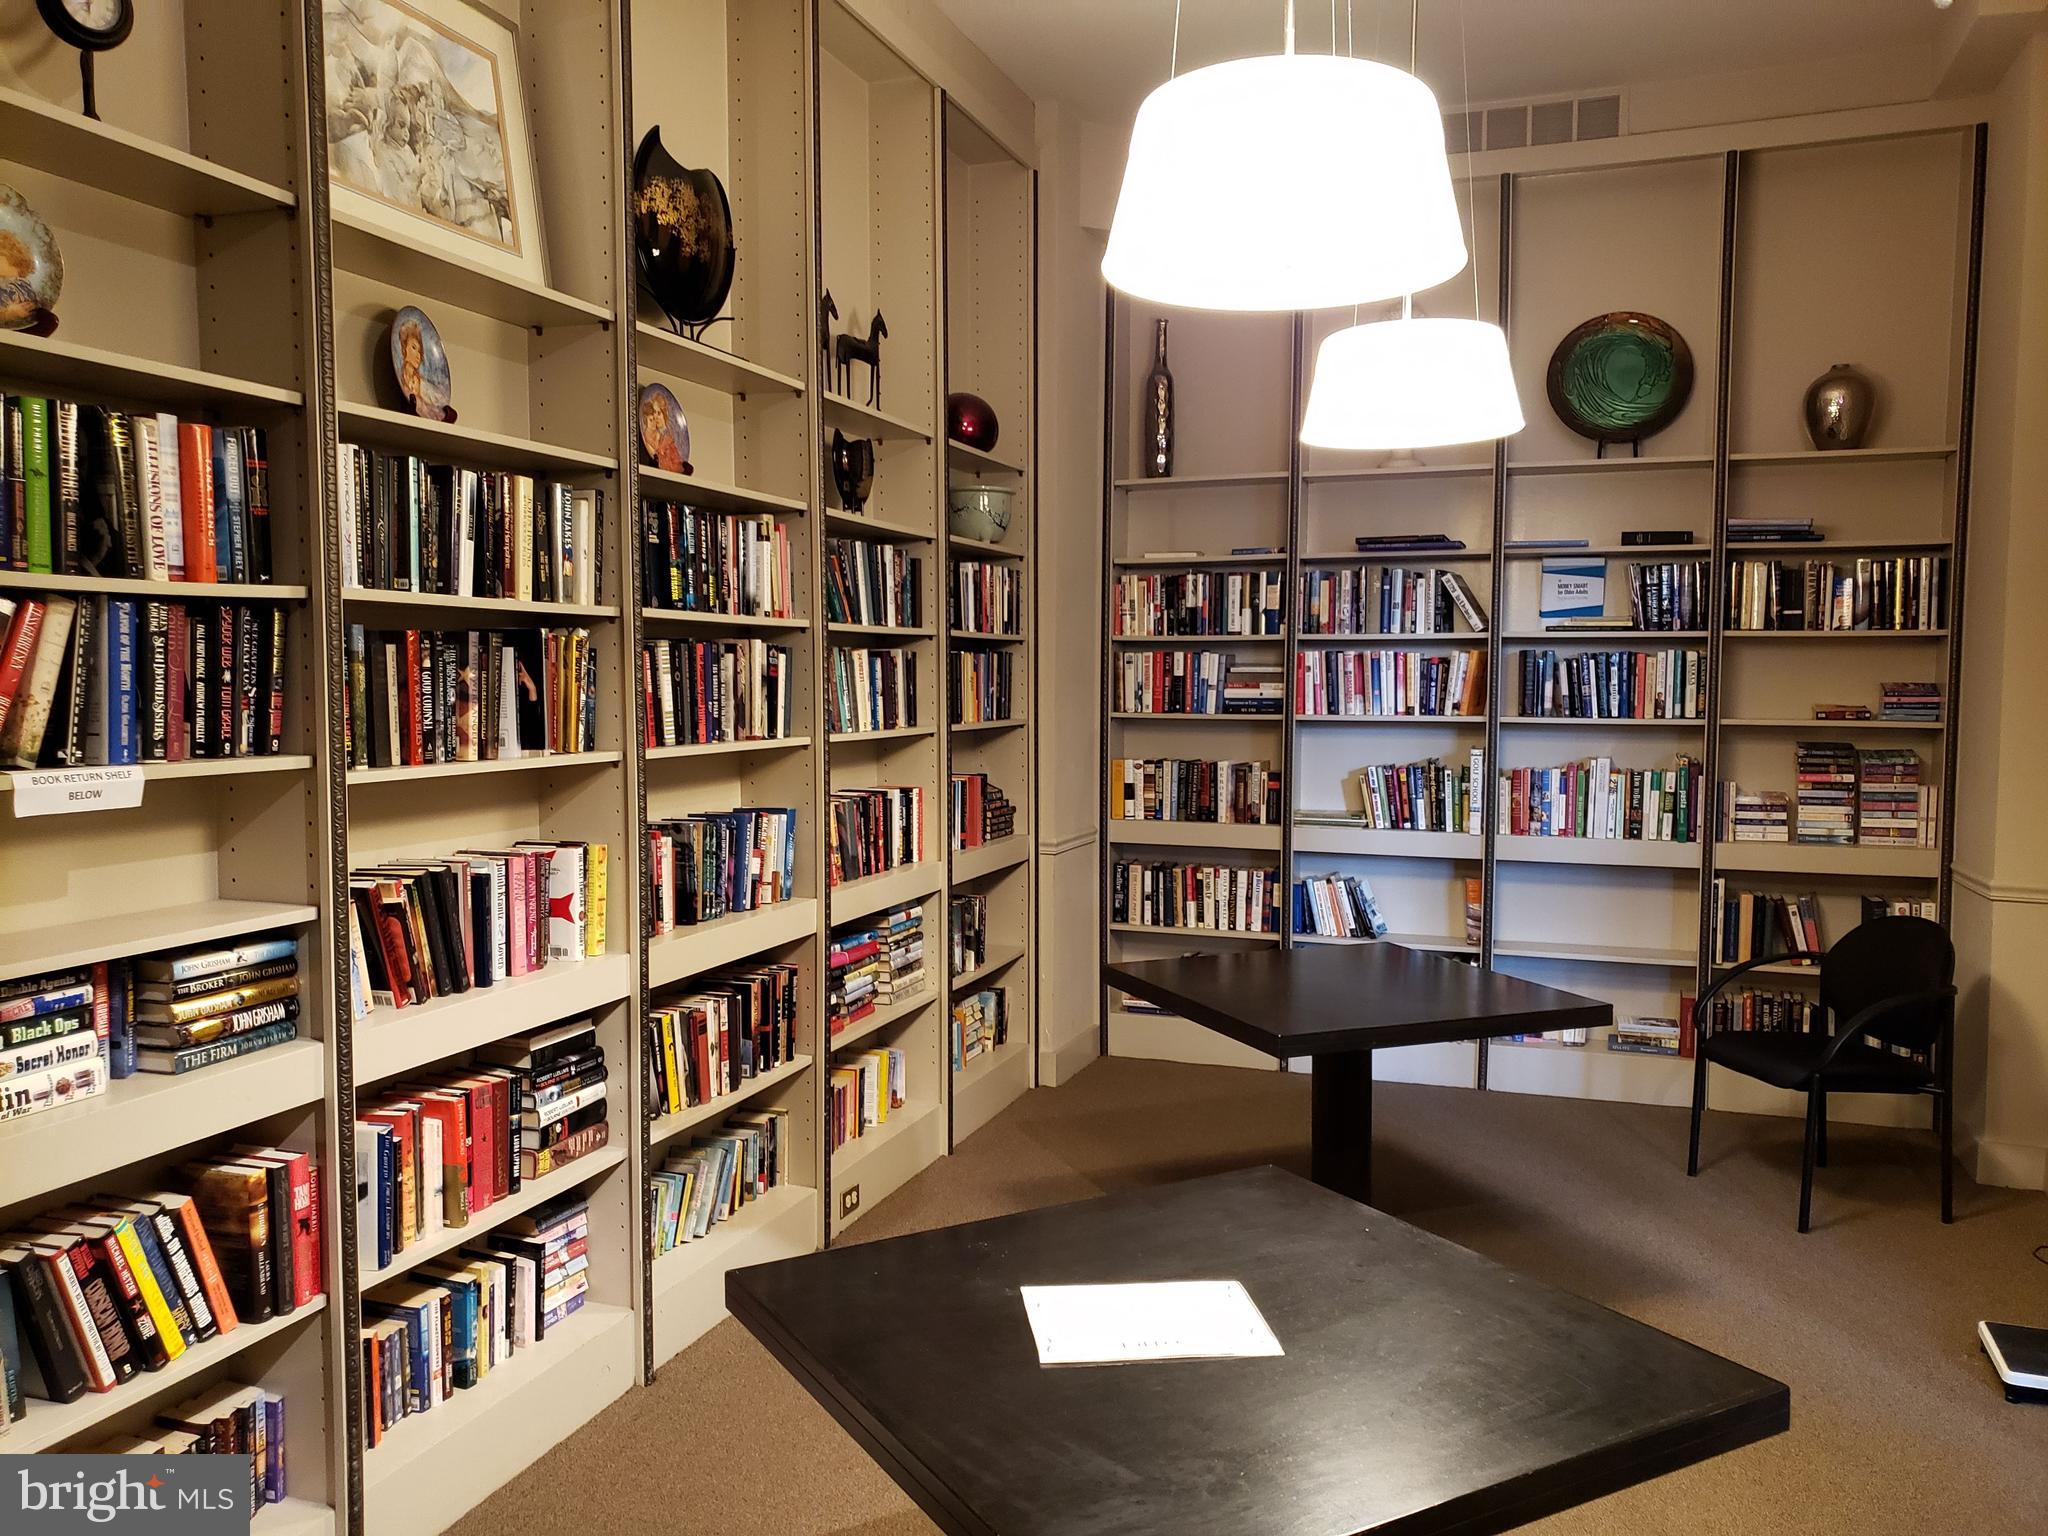 a view of a workspace with bookshelf